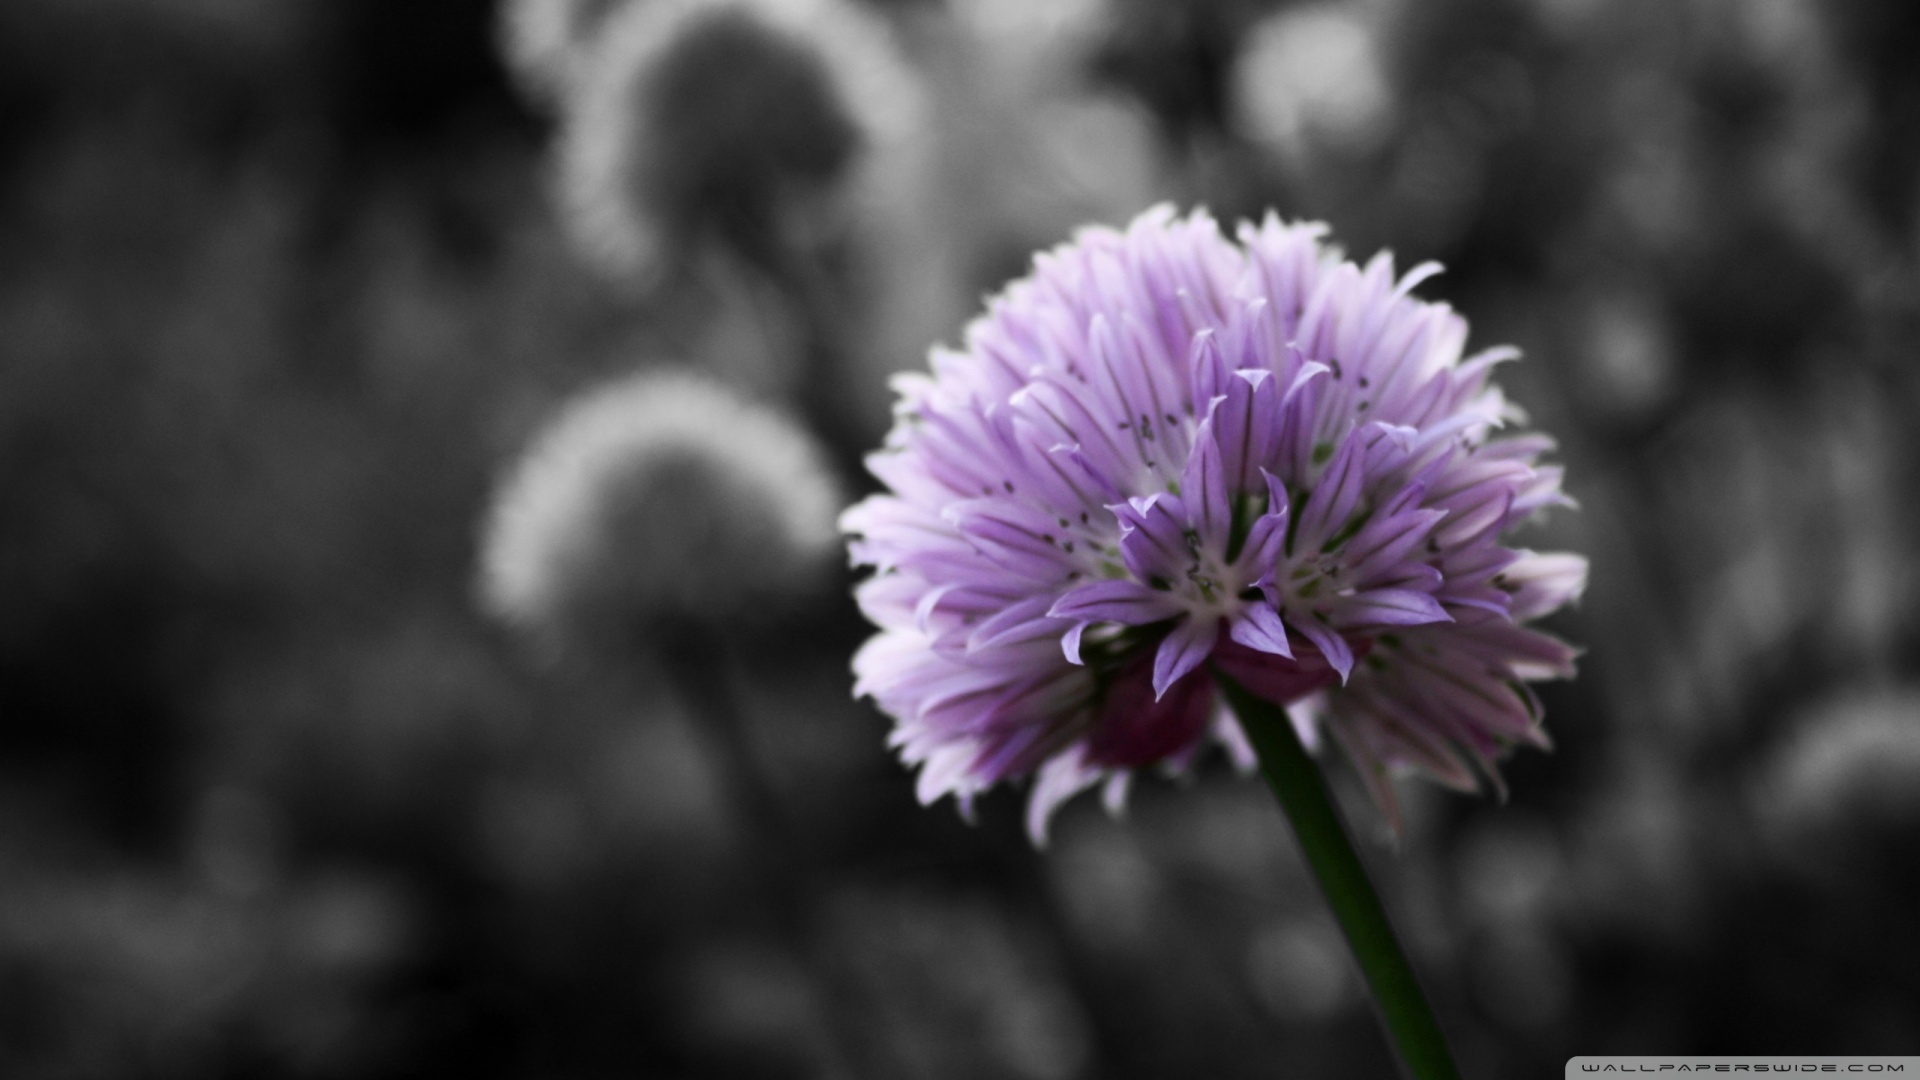 Purple Flower On Black And White Background Wallpaper